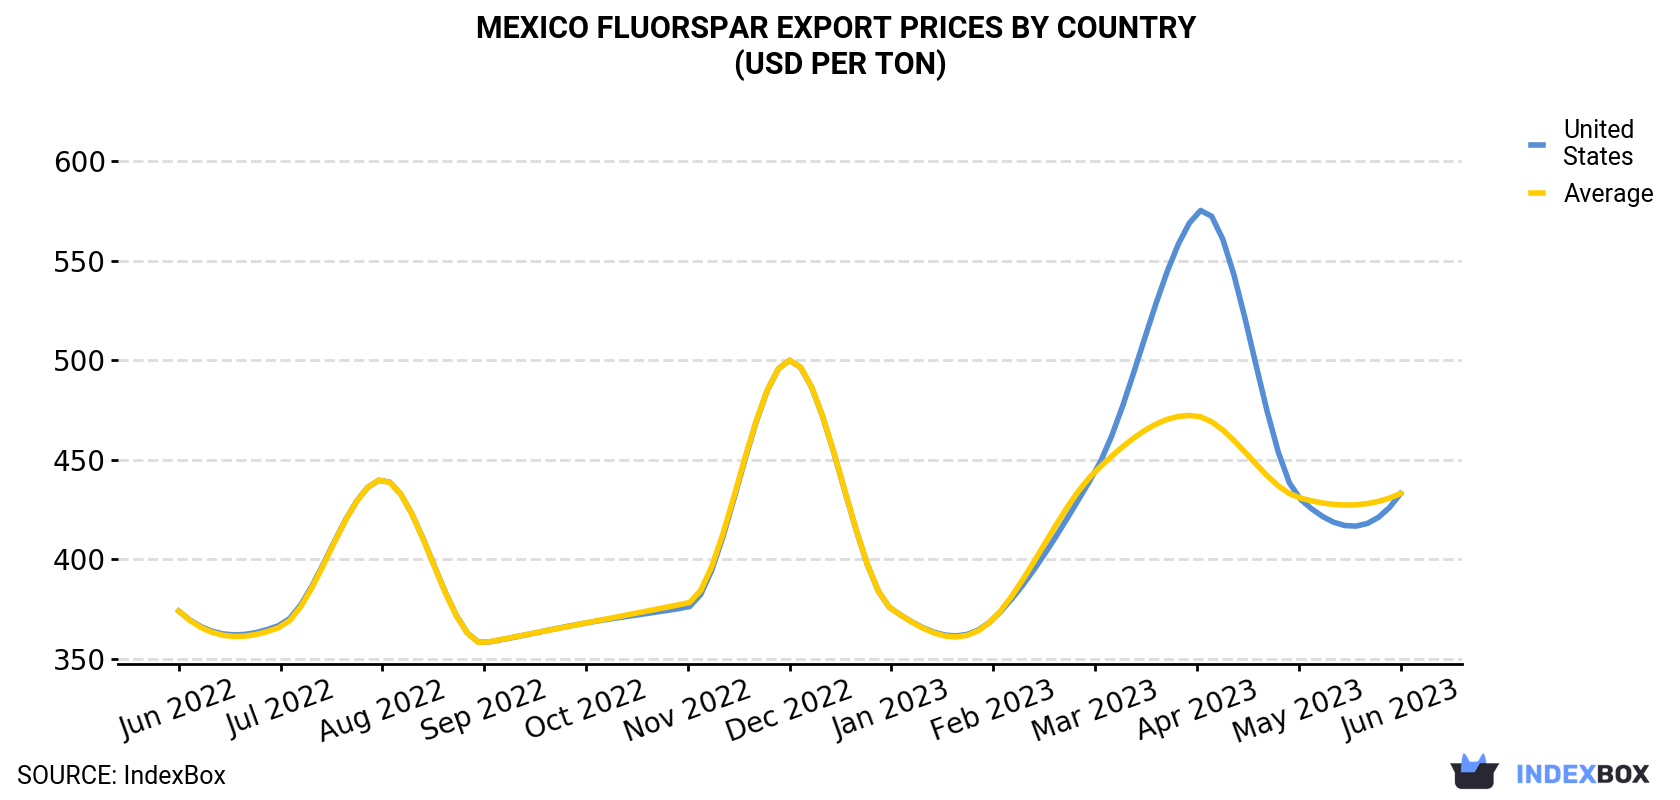 Mexico Fluorspar Export Prices By Country (USD Per Ton)